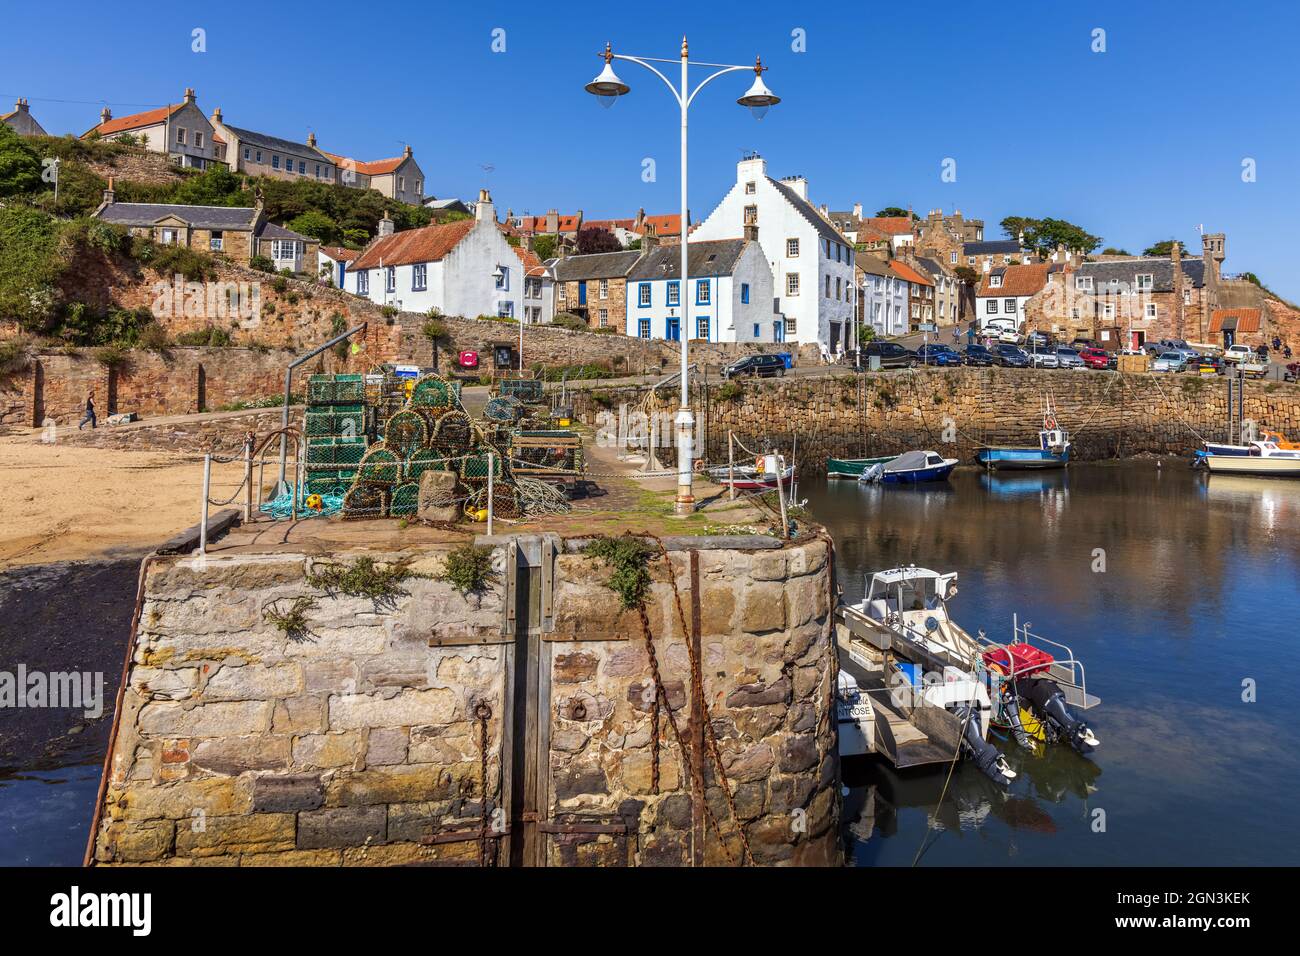 The historic fishing village of Crail, with its picturesque harbour and colourful fishing boats, on the east coast of Fife, Scotland. Stock Photo